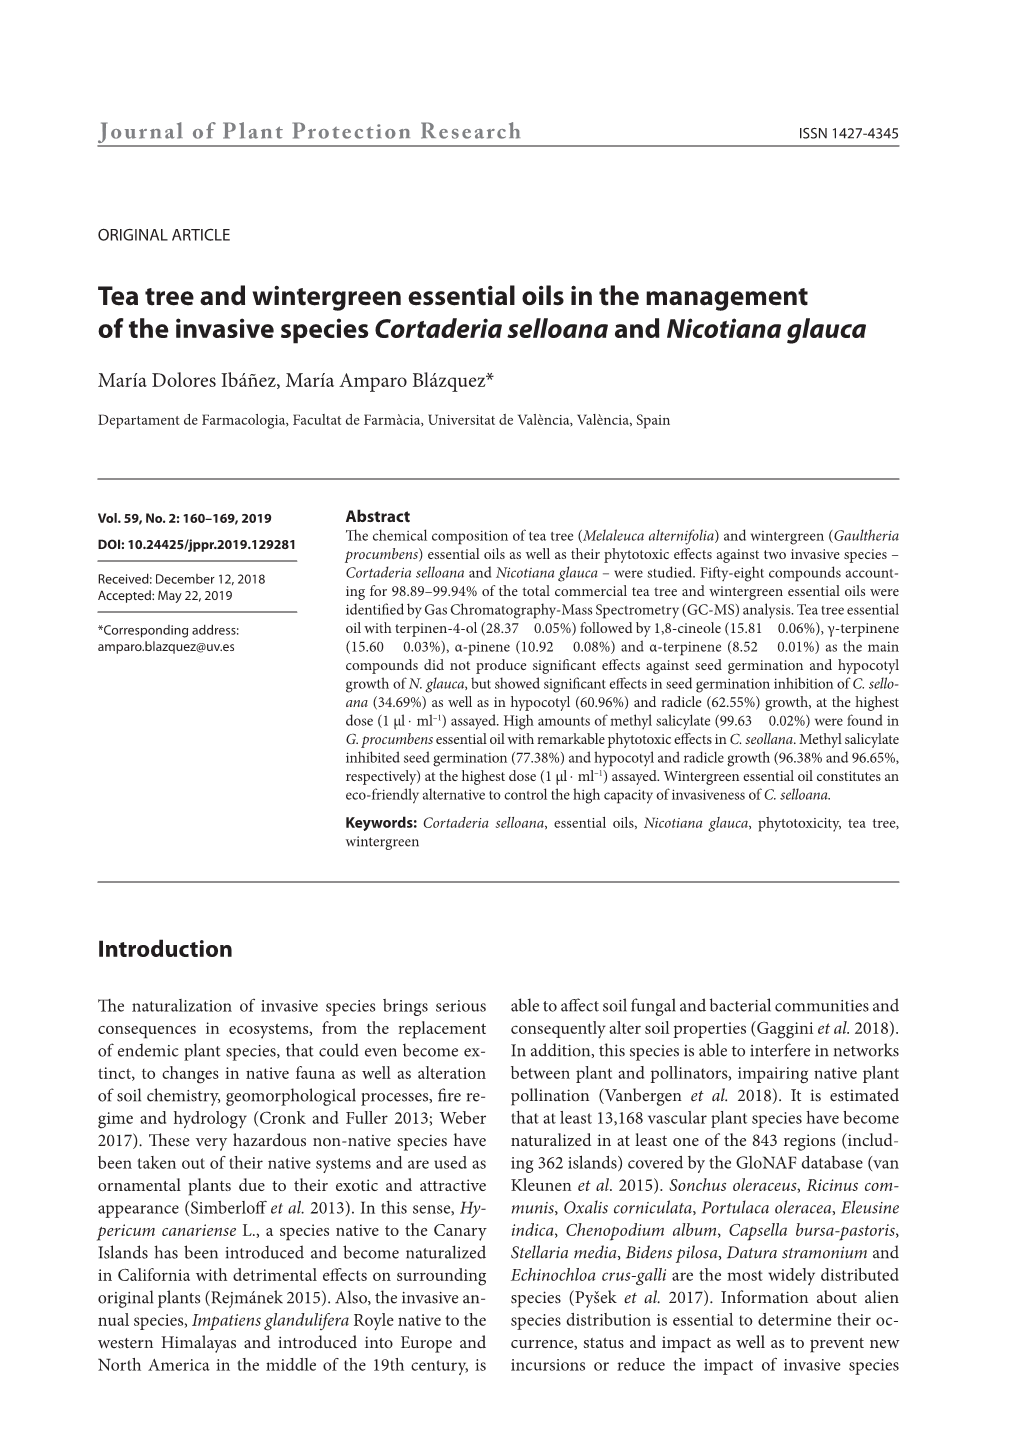 Tea Tree and Wintergreen Essential Oils in the Management of the Invasive Species Cortaderia Selloana and Nicotiana Glauca